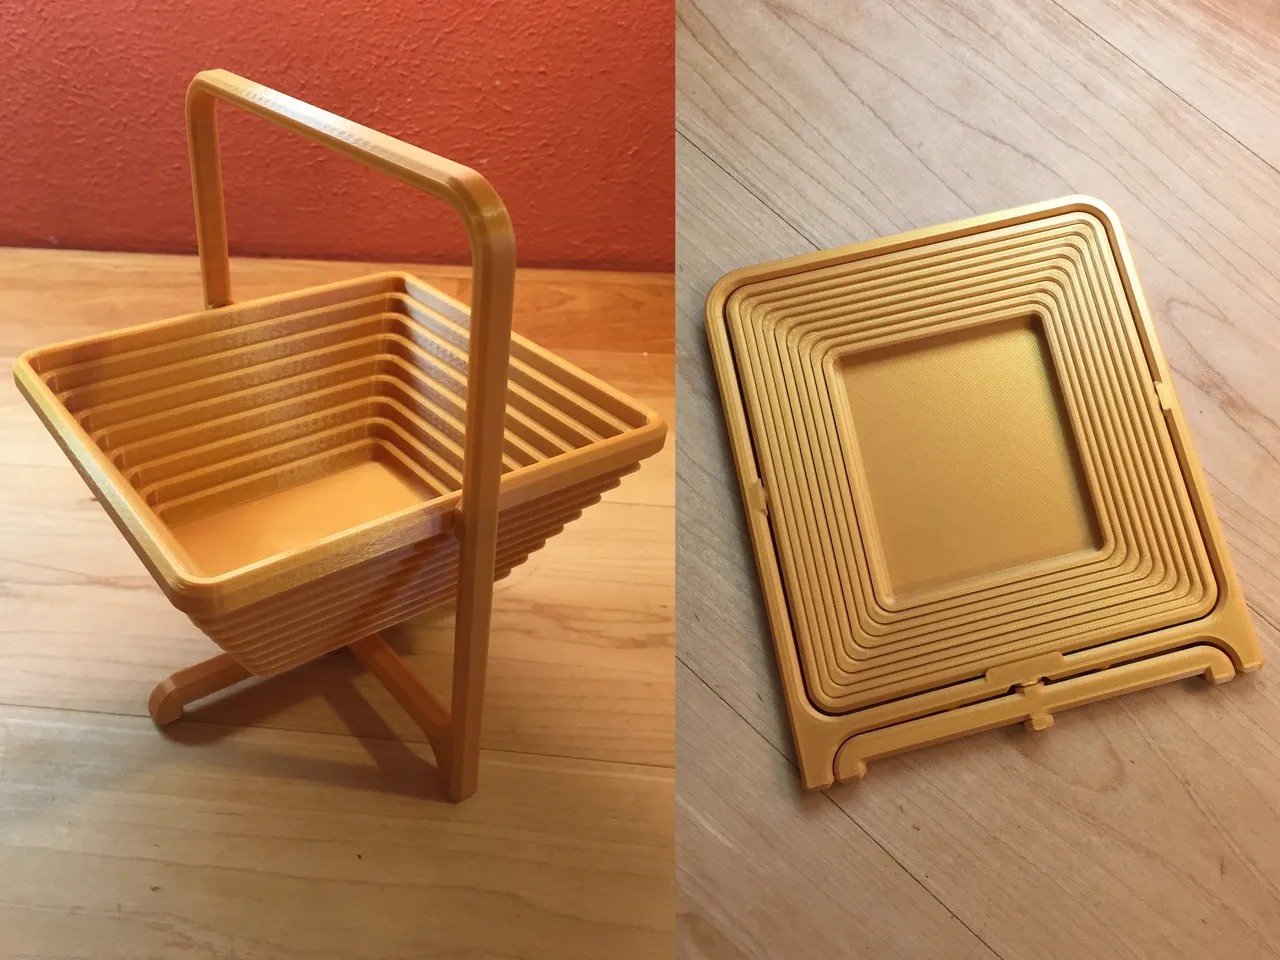 Collapsible Basket (optimized) by 3D Printing World, Download free STL  model